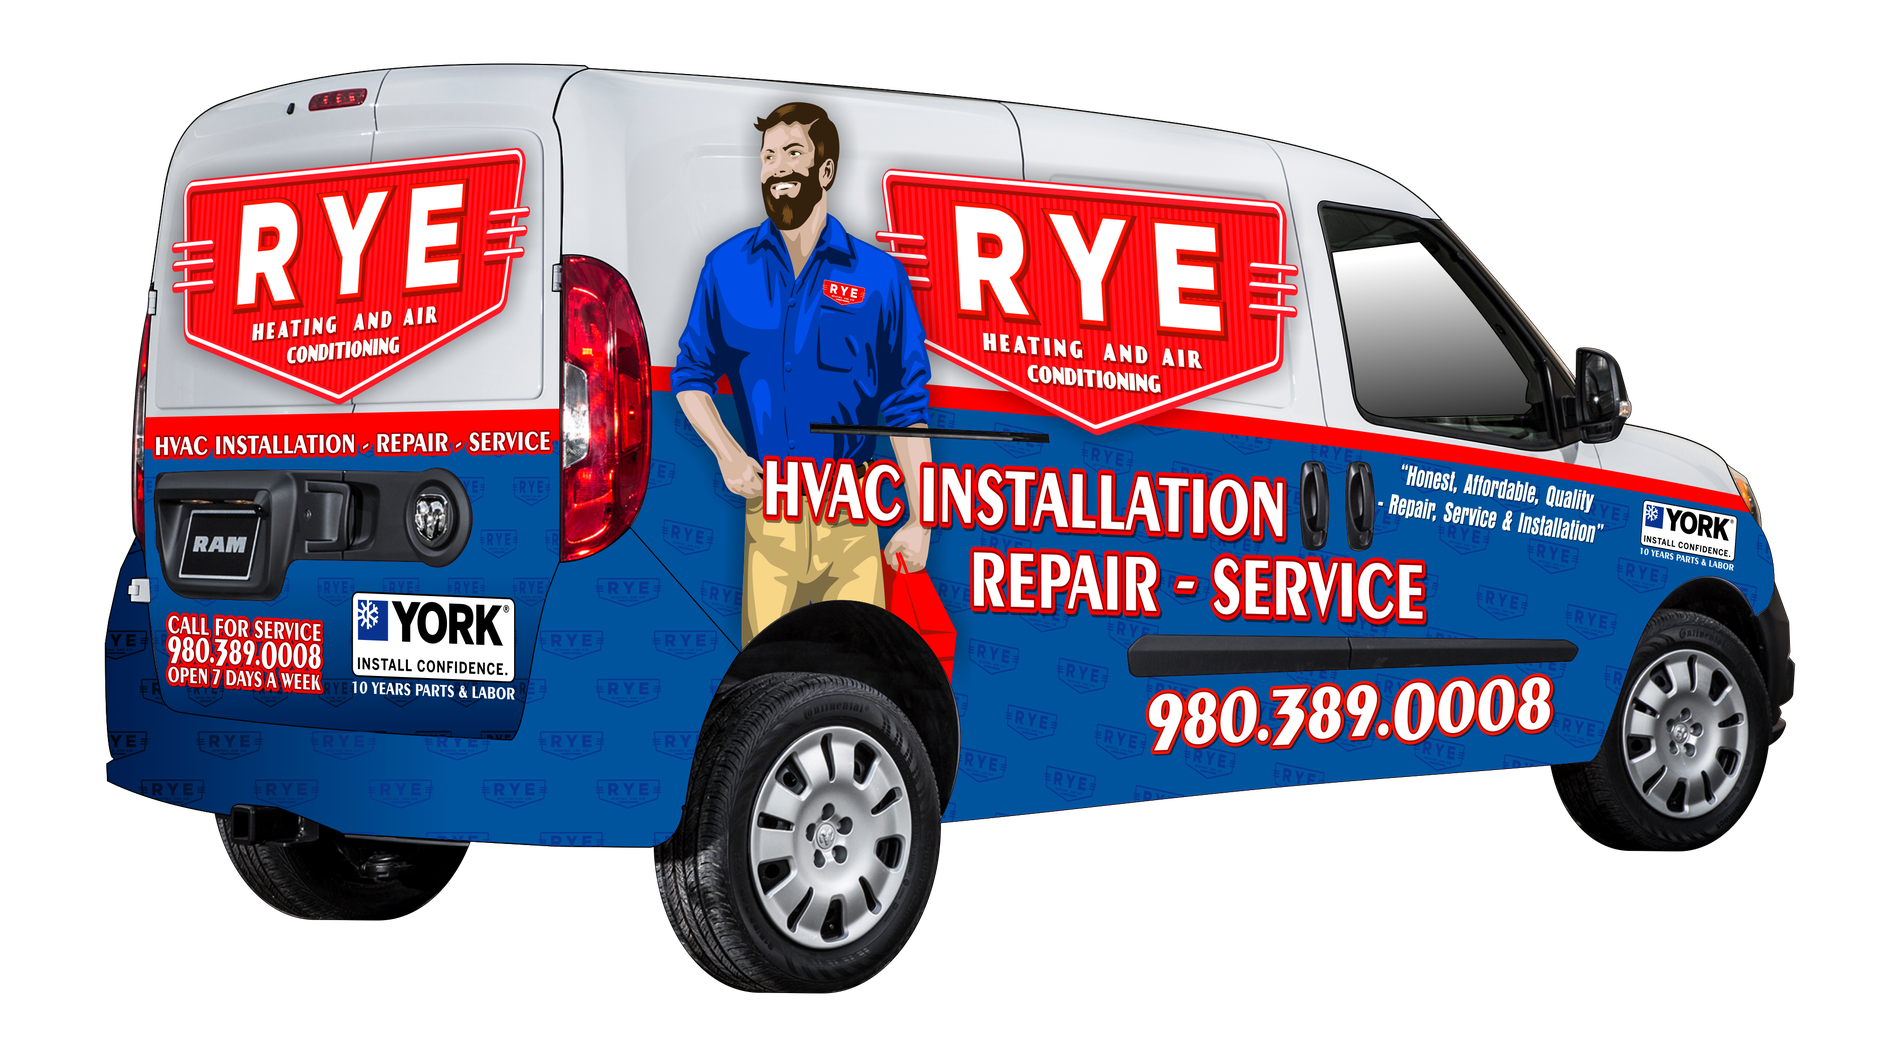 Rye Heating and Air Conditioning Photo